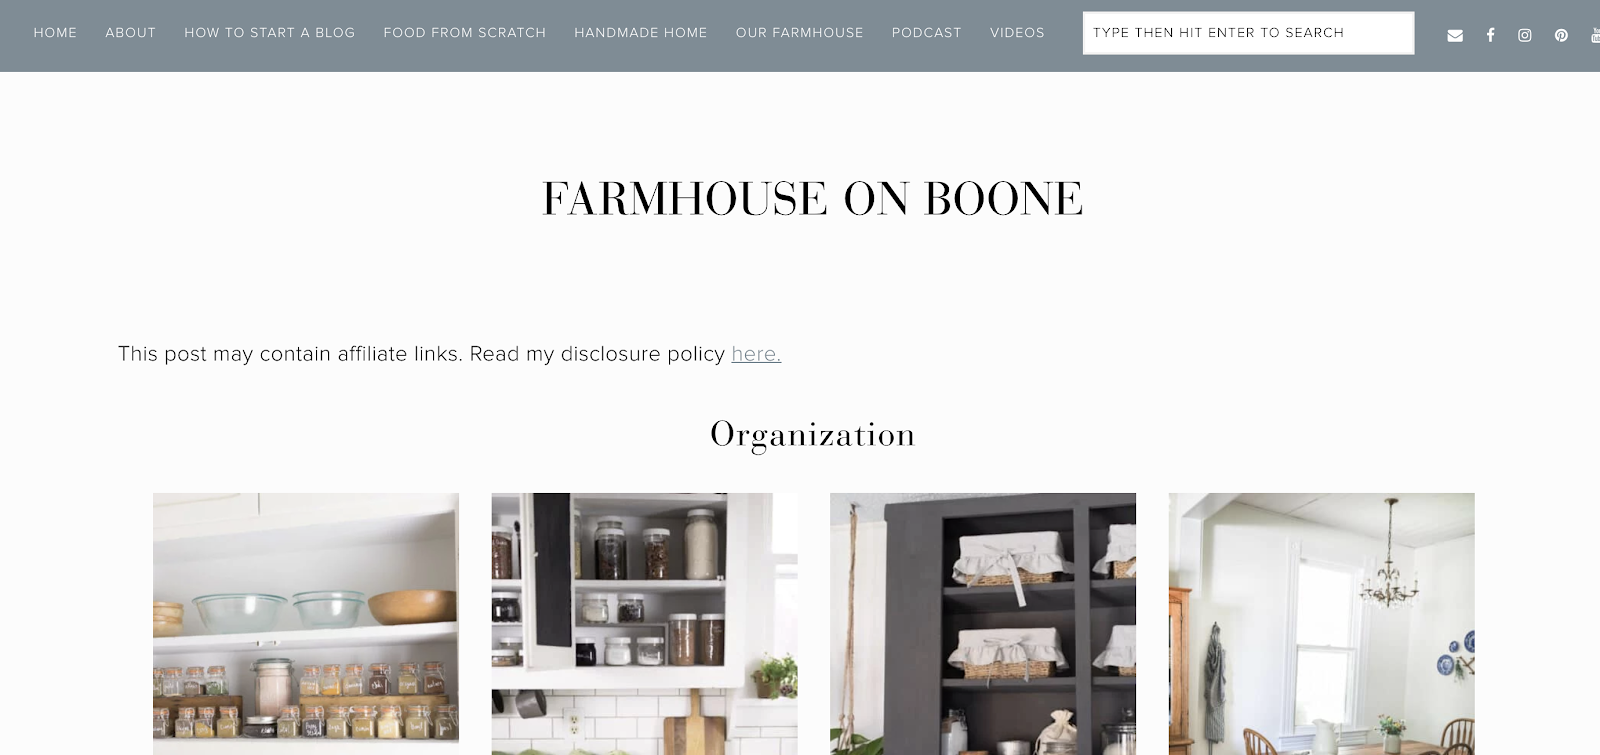 Farmhouse on the Boone Homepage Screenshot and Example of Home and Wellness Niche